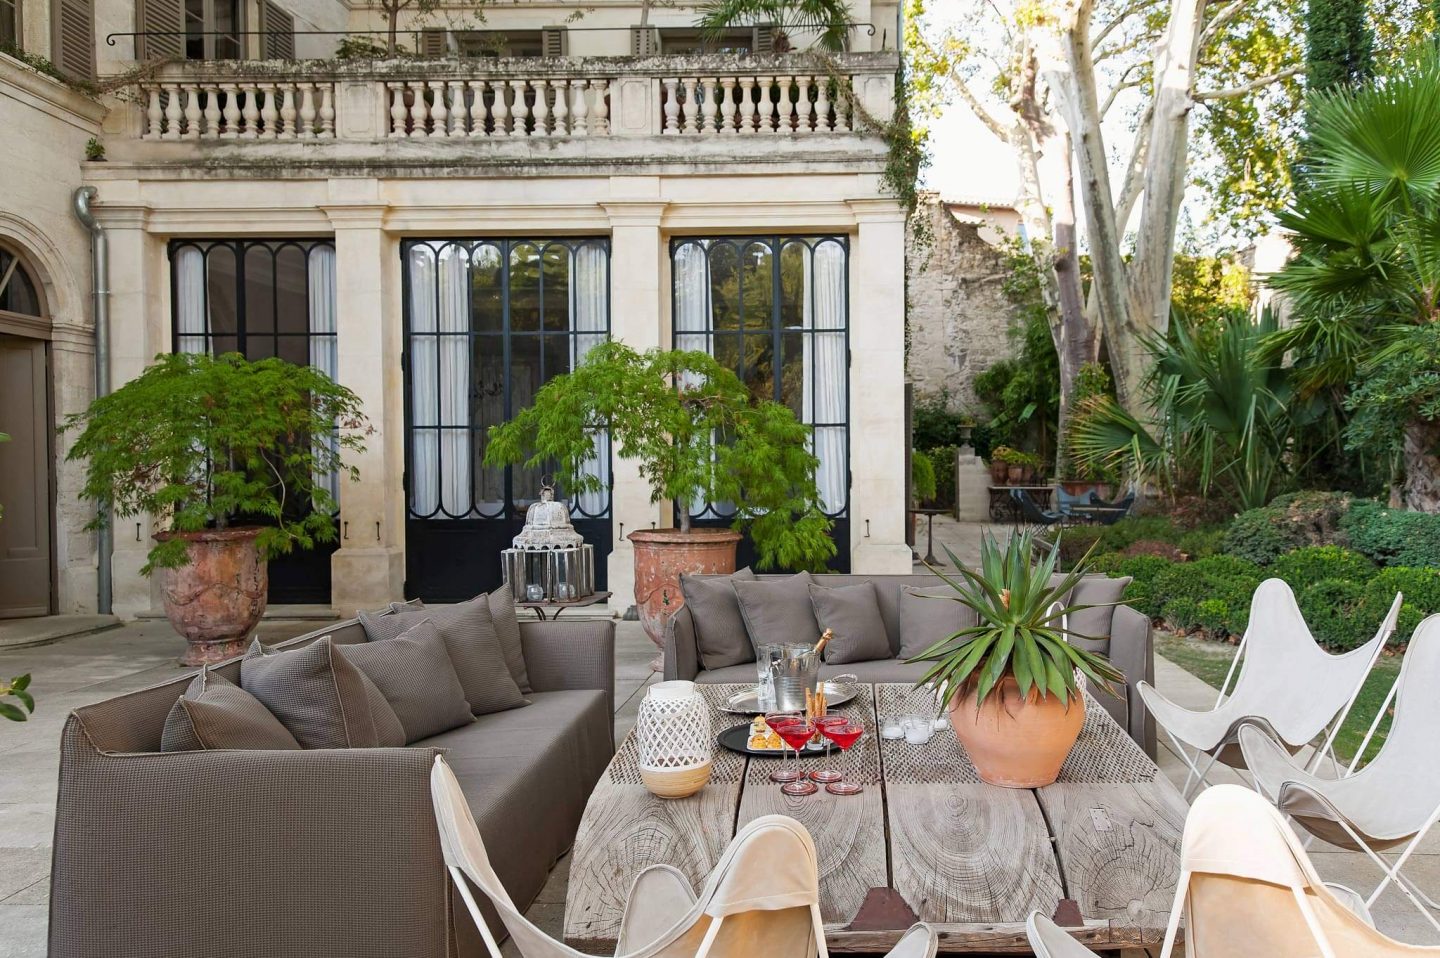 Beautiful French country garden inspiration from a luxurious property in the South of France. Breathtaking 19th century restored French chateau with largest private garden in Avignon. Avignon Hôtel Particulier. Photo: Haven In.